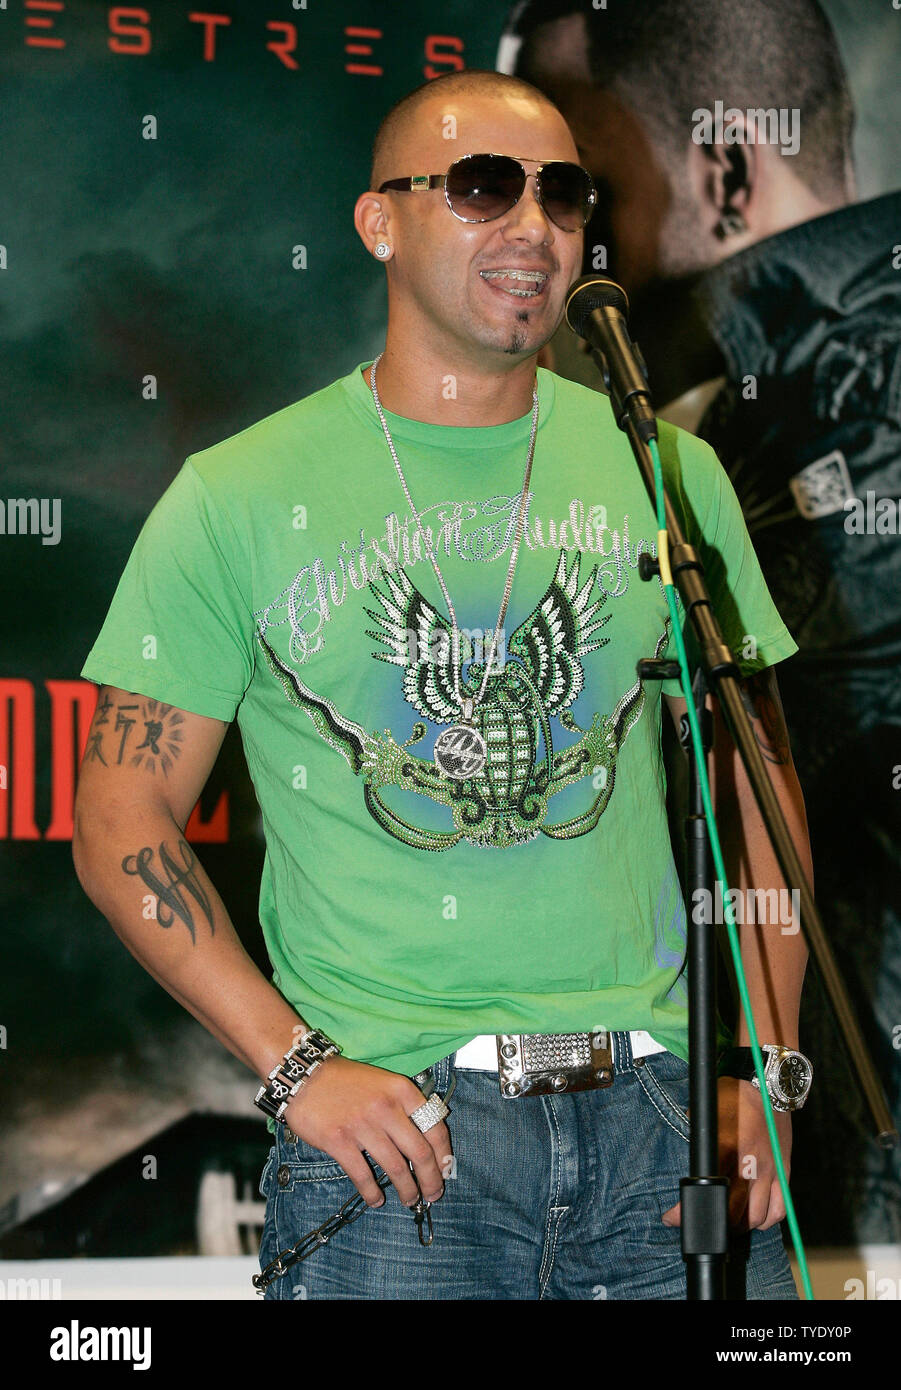 Wisin with the latin reggaeton group Wisin Y Yandel speaks at a pre concert press conference in which they receive a platinum album at the American Airlines Arena in Miami on June 28, 2008. (UPI Photo/Michael Bush) Stock Photo